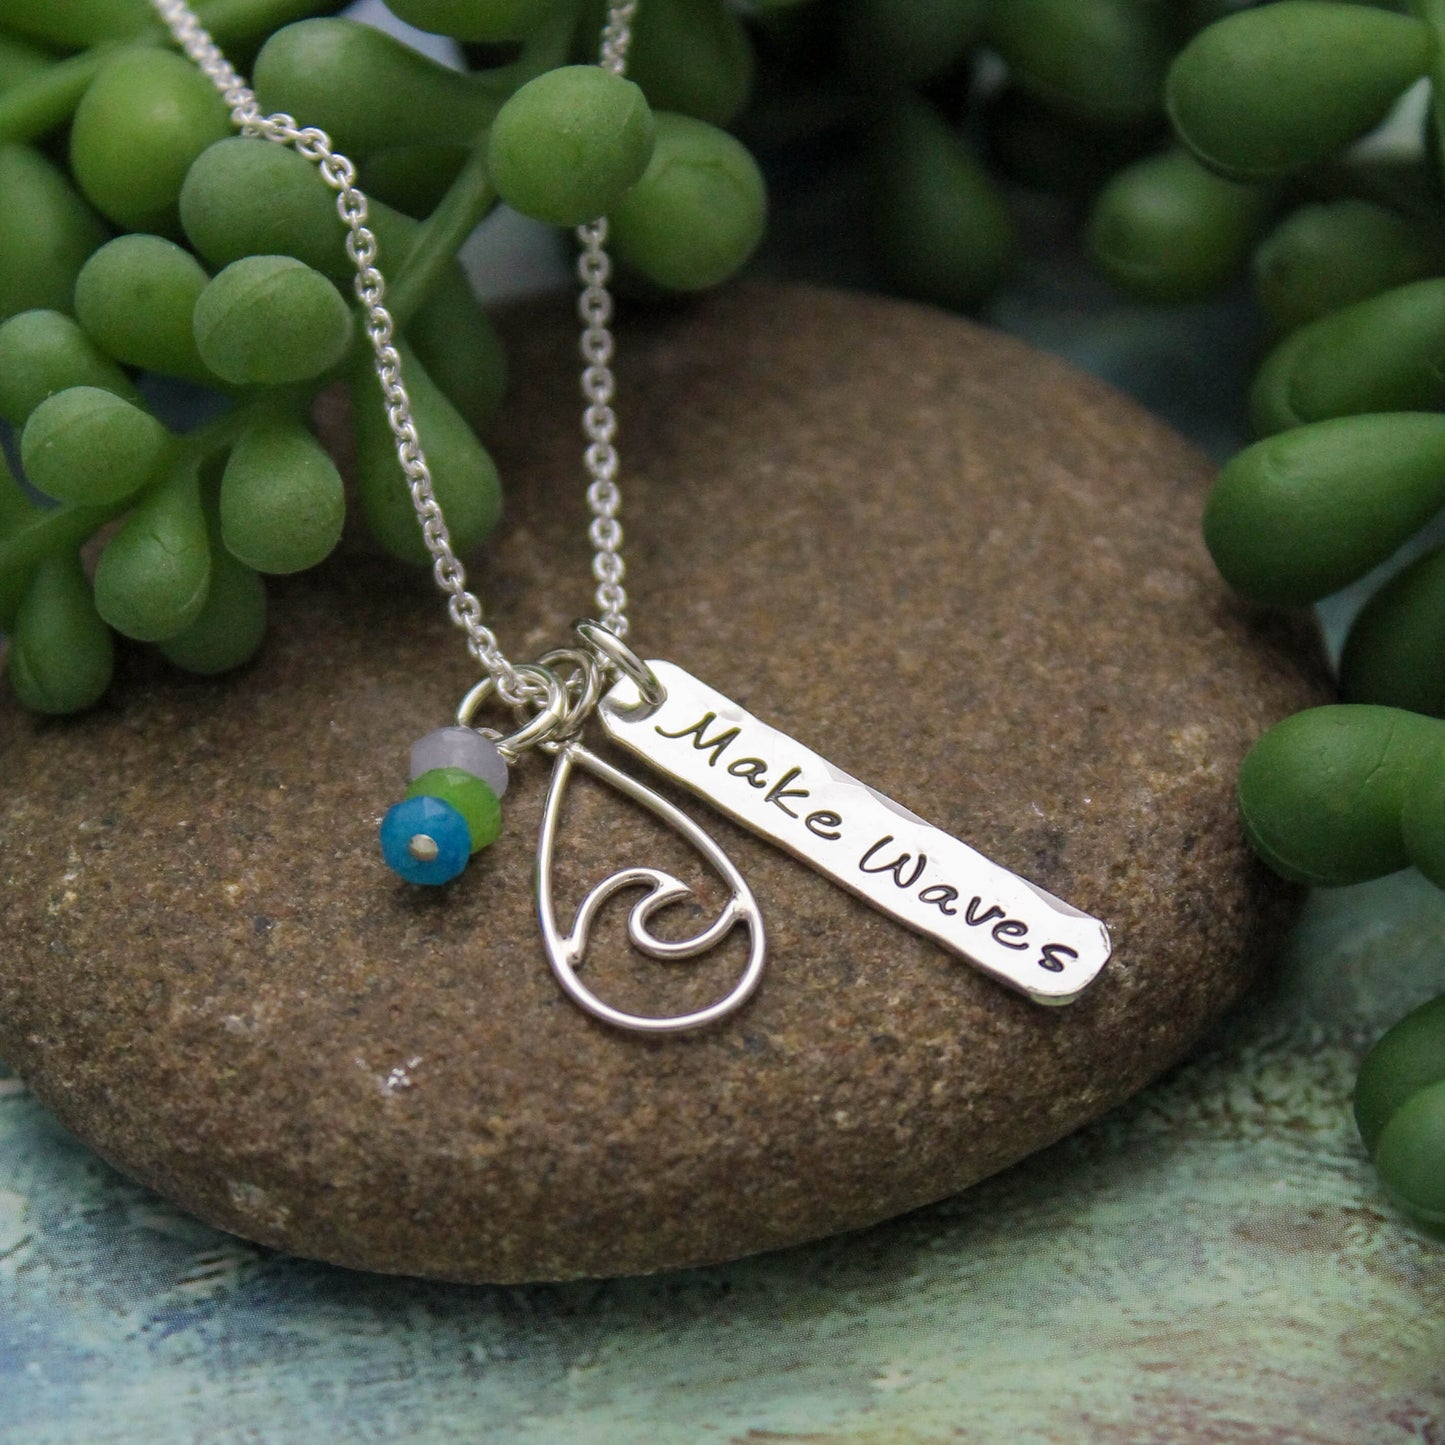 Make Waves Necklace, Ocean Teardrop Wave Charm Necklace, Surfer Girl Necklace, Cute Surfer Jewelry, Gifts for Her, Cruise Vacation Jewelry